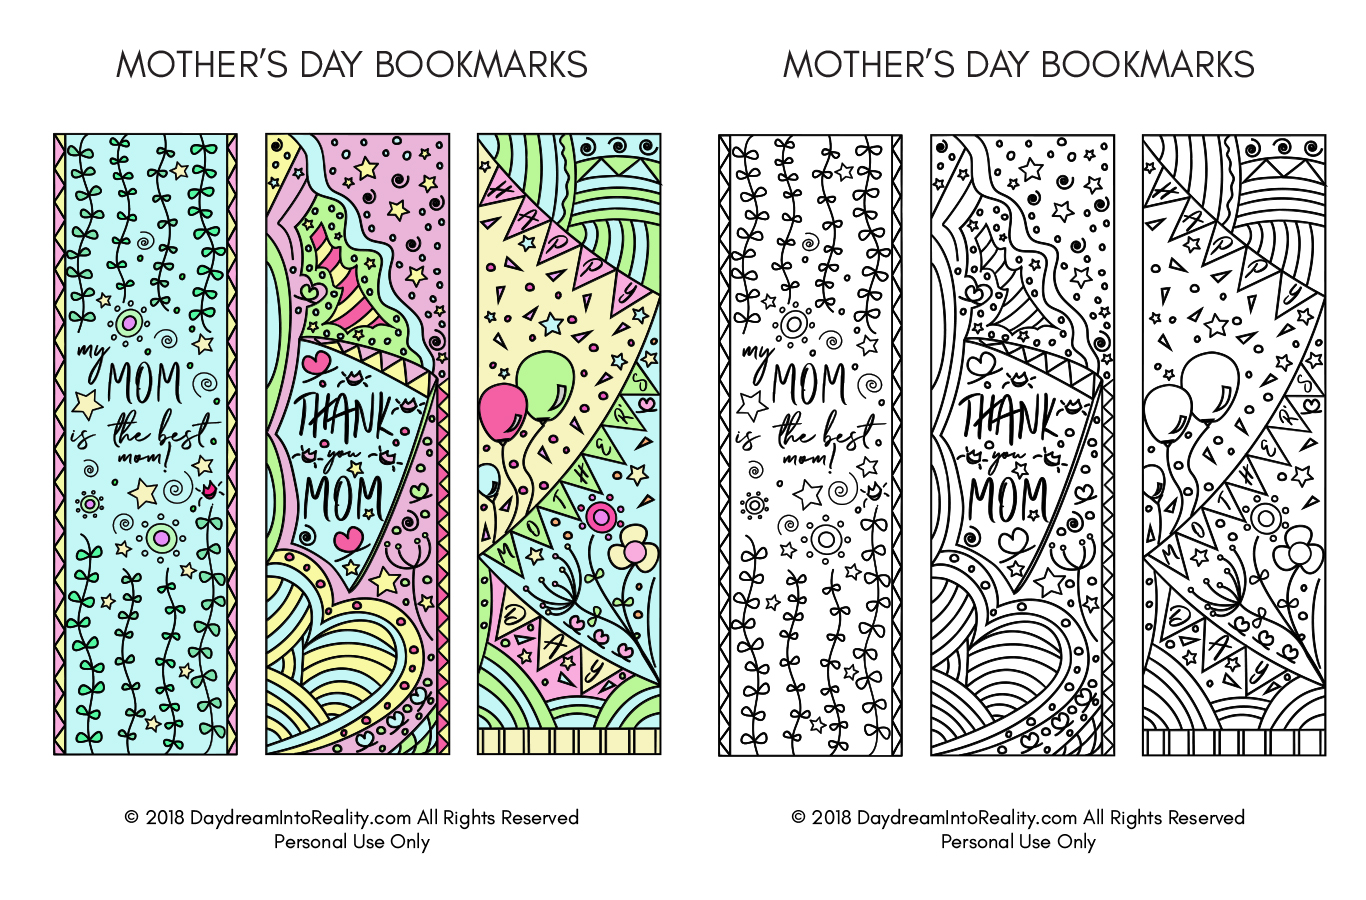 coloring-mother-s-day-bookmarks-free-printable-daydream-into-reality